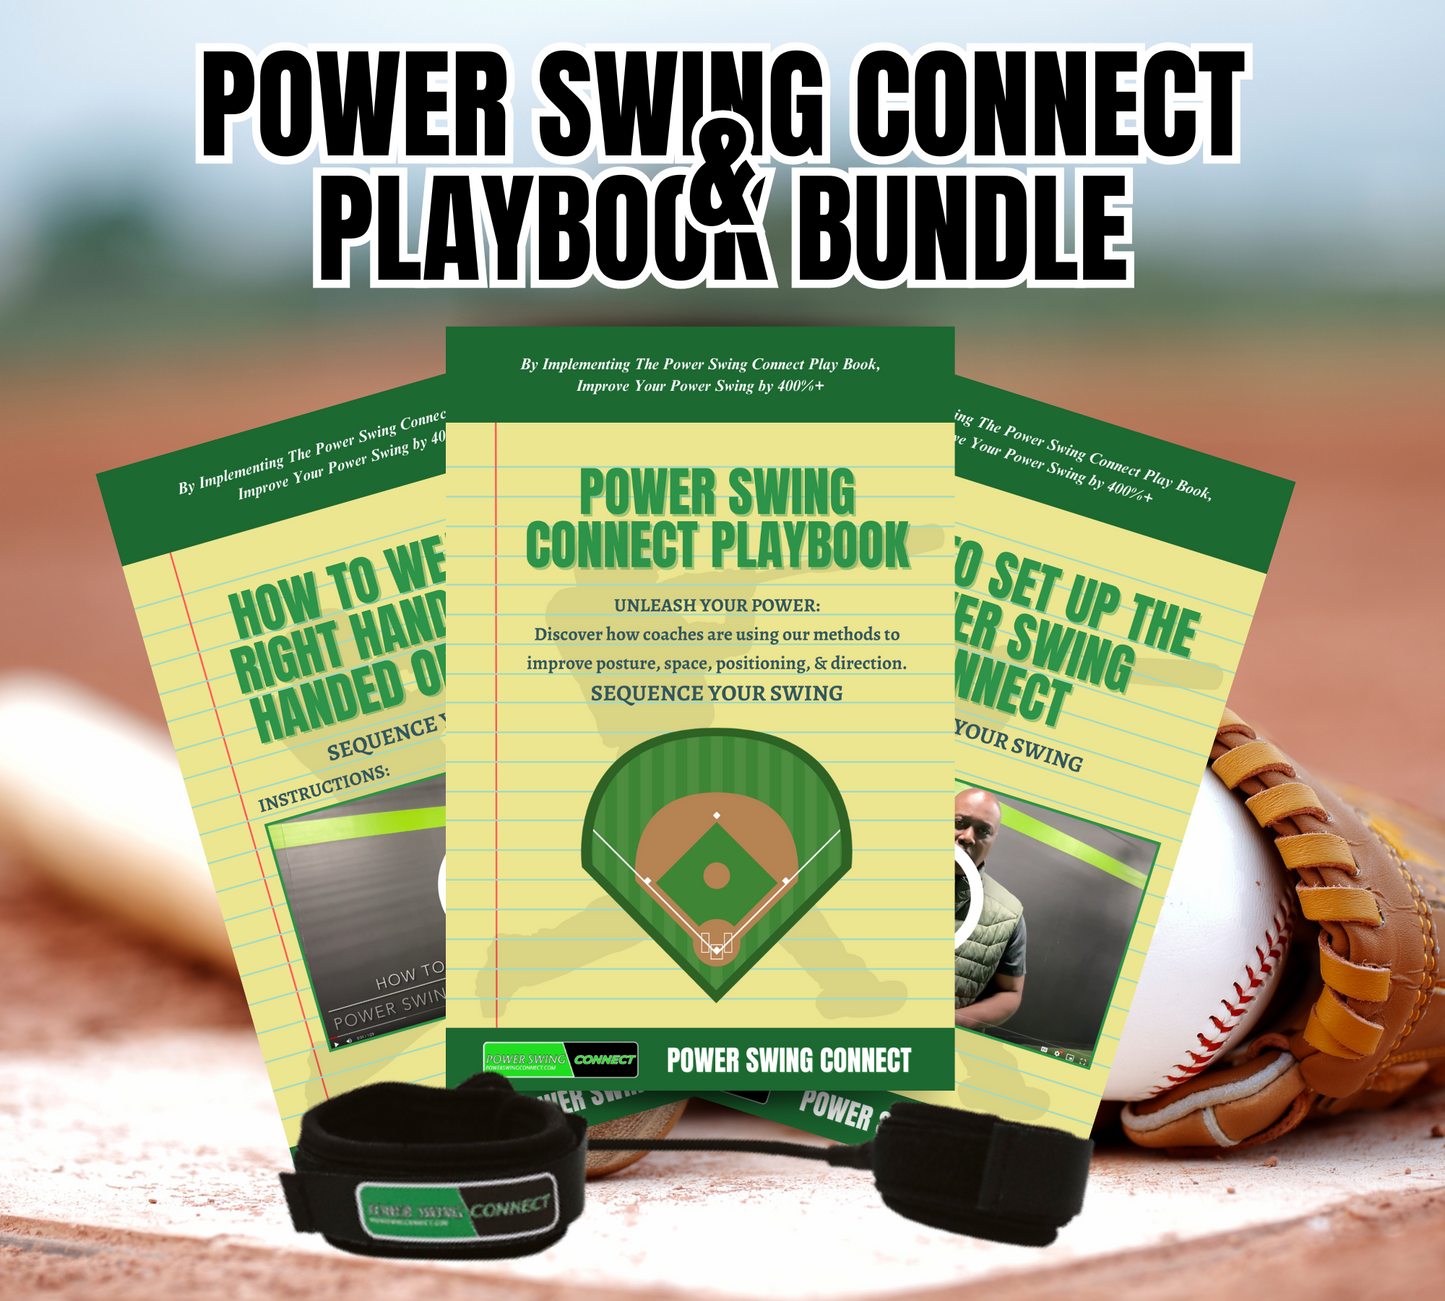 POWER SWING CONNECT + Playbook (2 Pack) (1 Thick + 1 Slim)